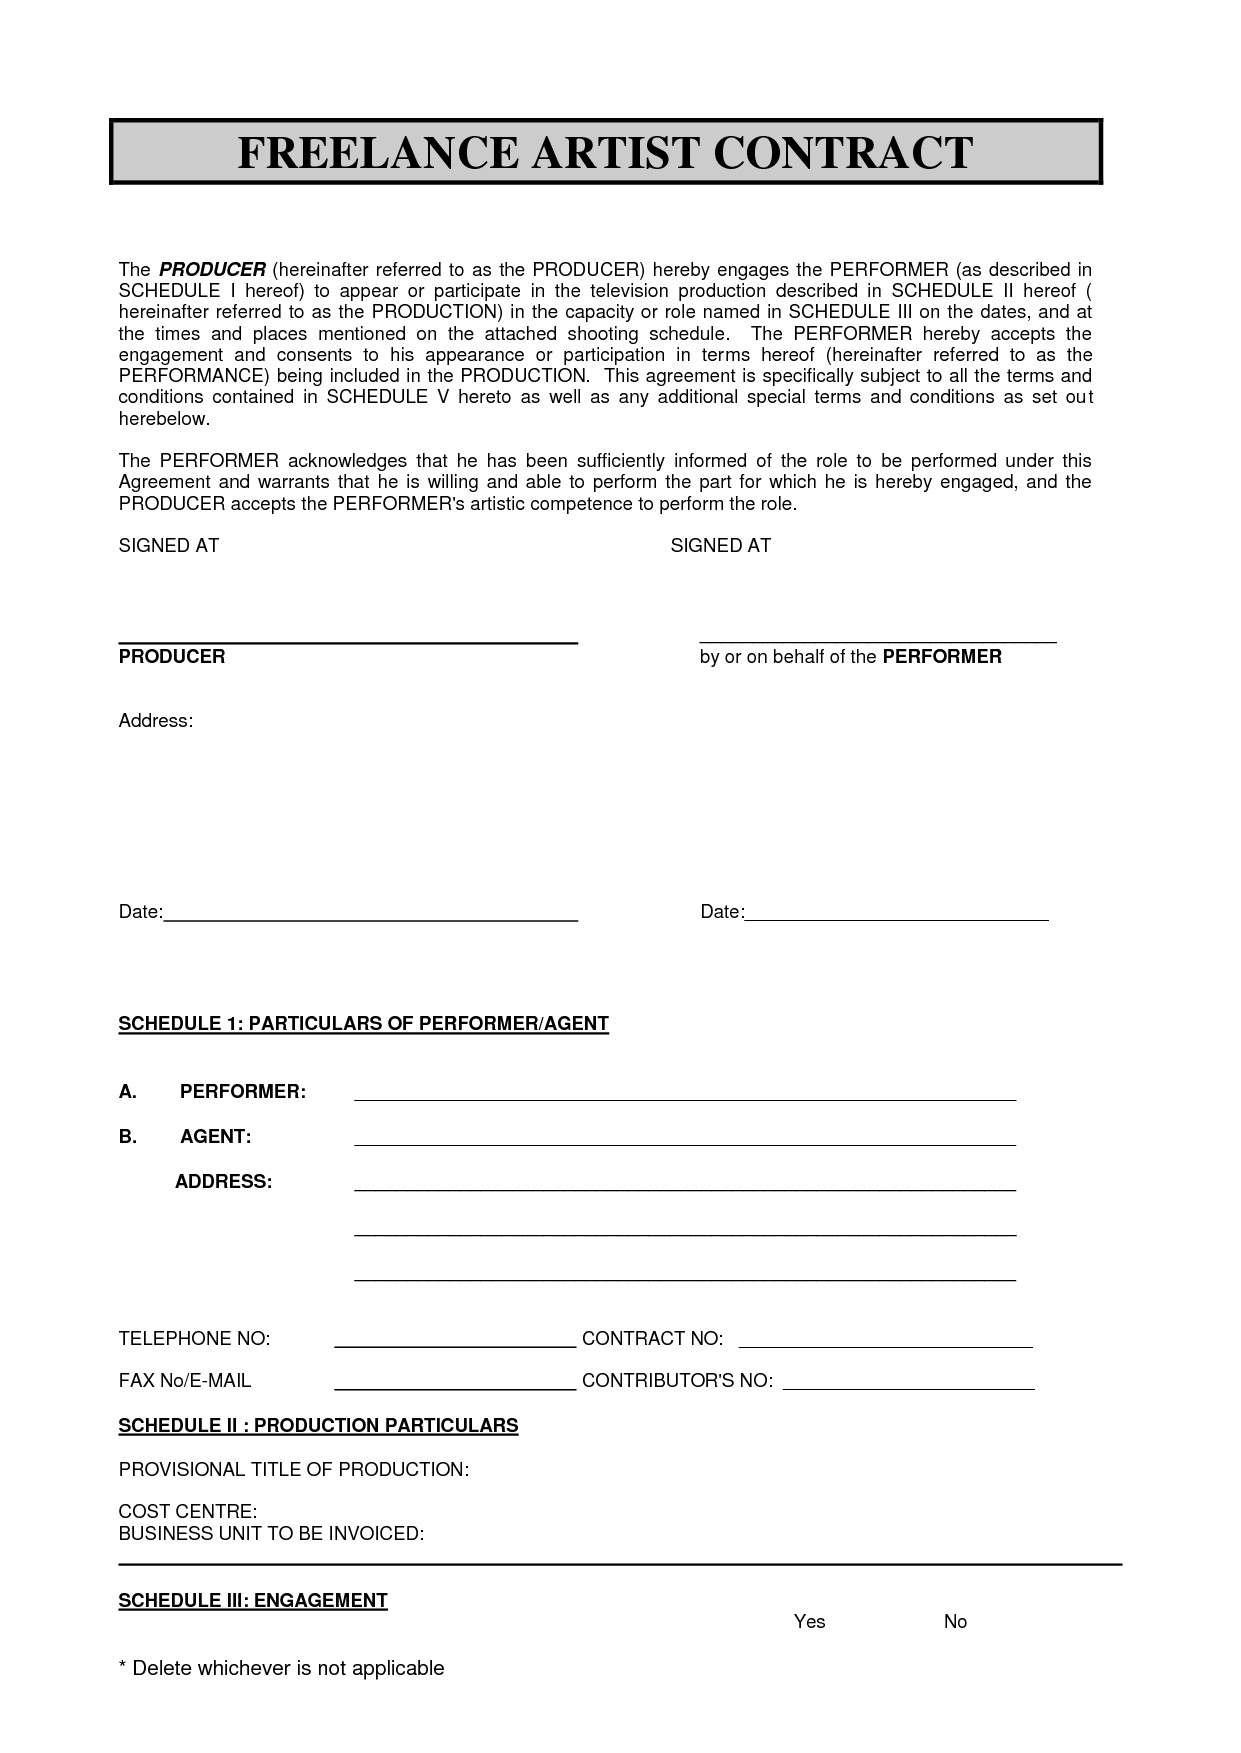 SABC Contract 2010 pdf FREELANCE ARTIST CONTRACT by